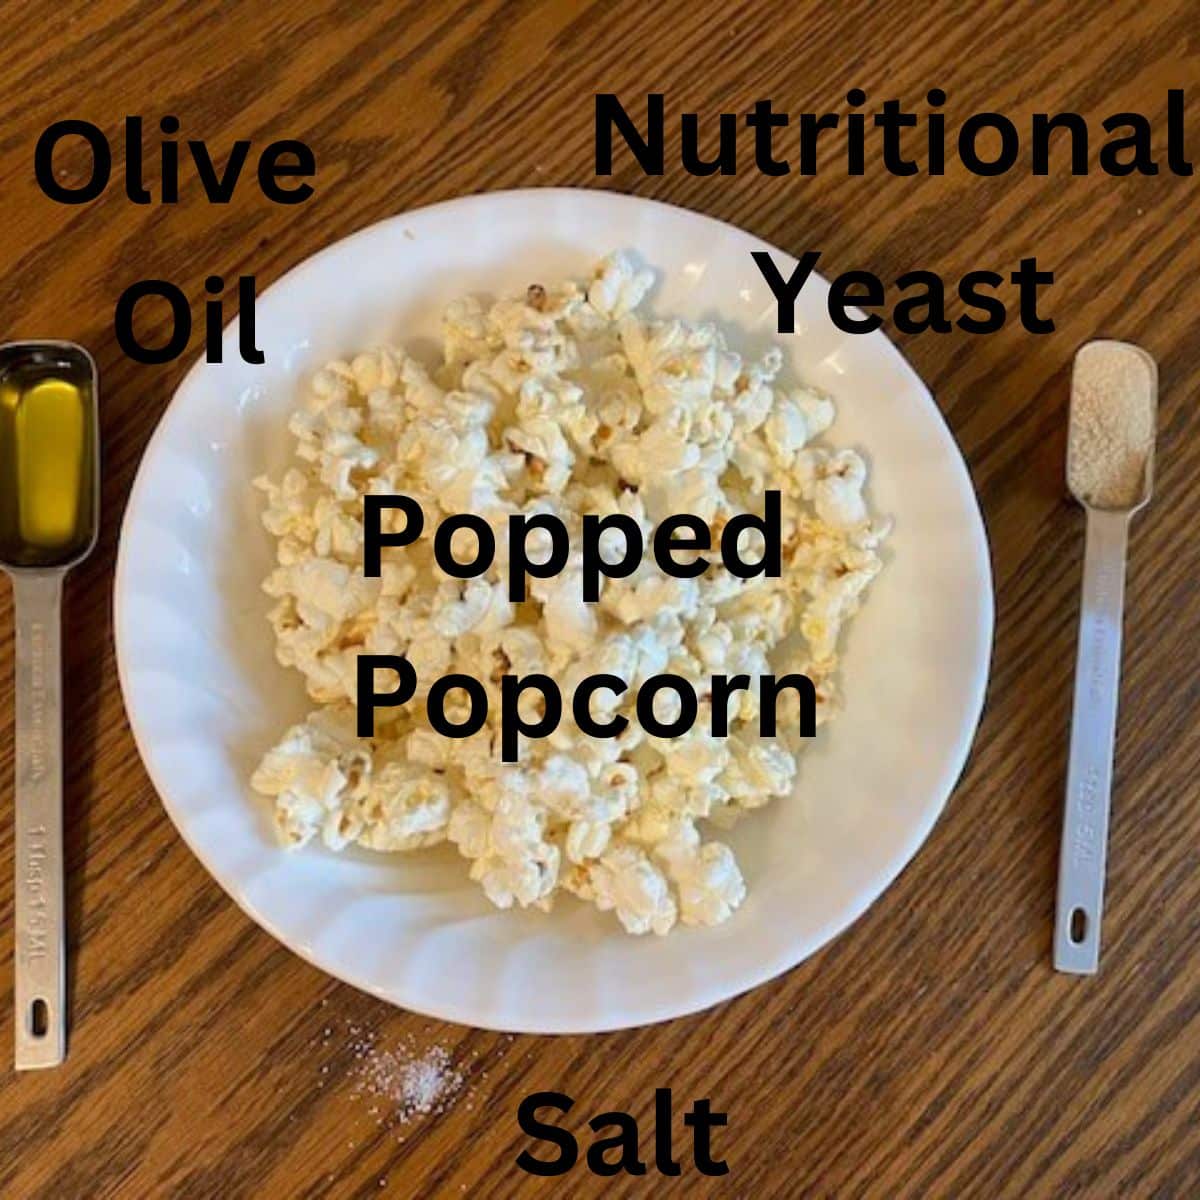 ingredients for the vegan popcorn recipe (popped popcorn, nutritional yeast, olive oil, and salt) with labels on a wood table.